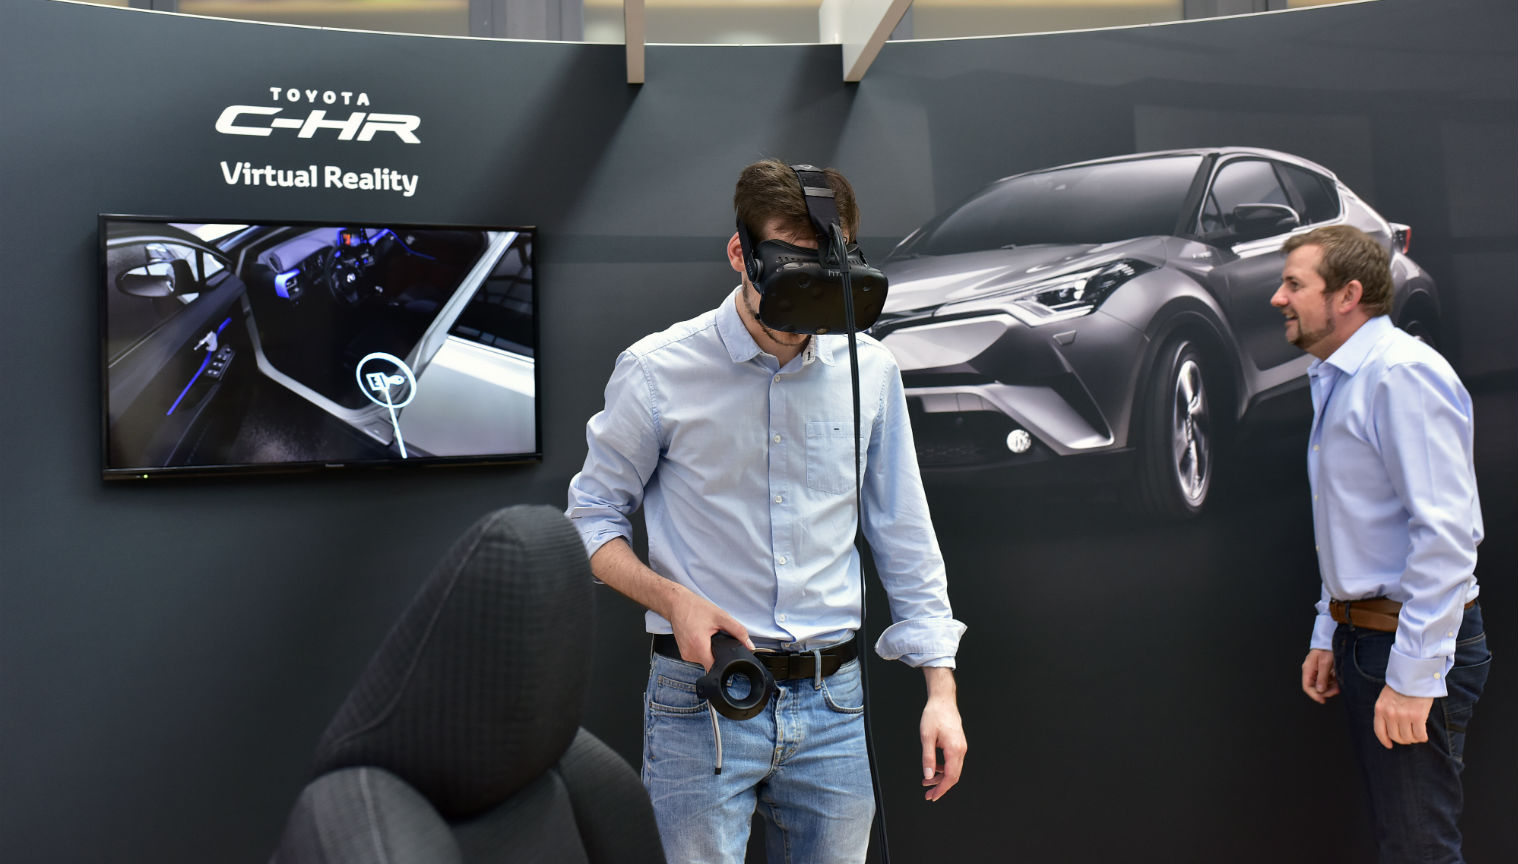 virtual reality automobile experience from Toyota